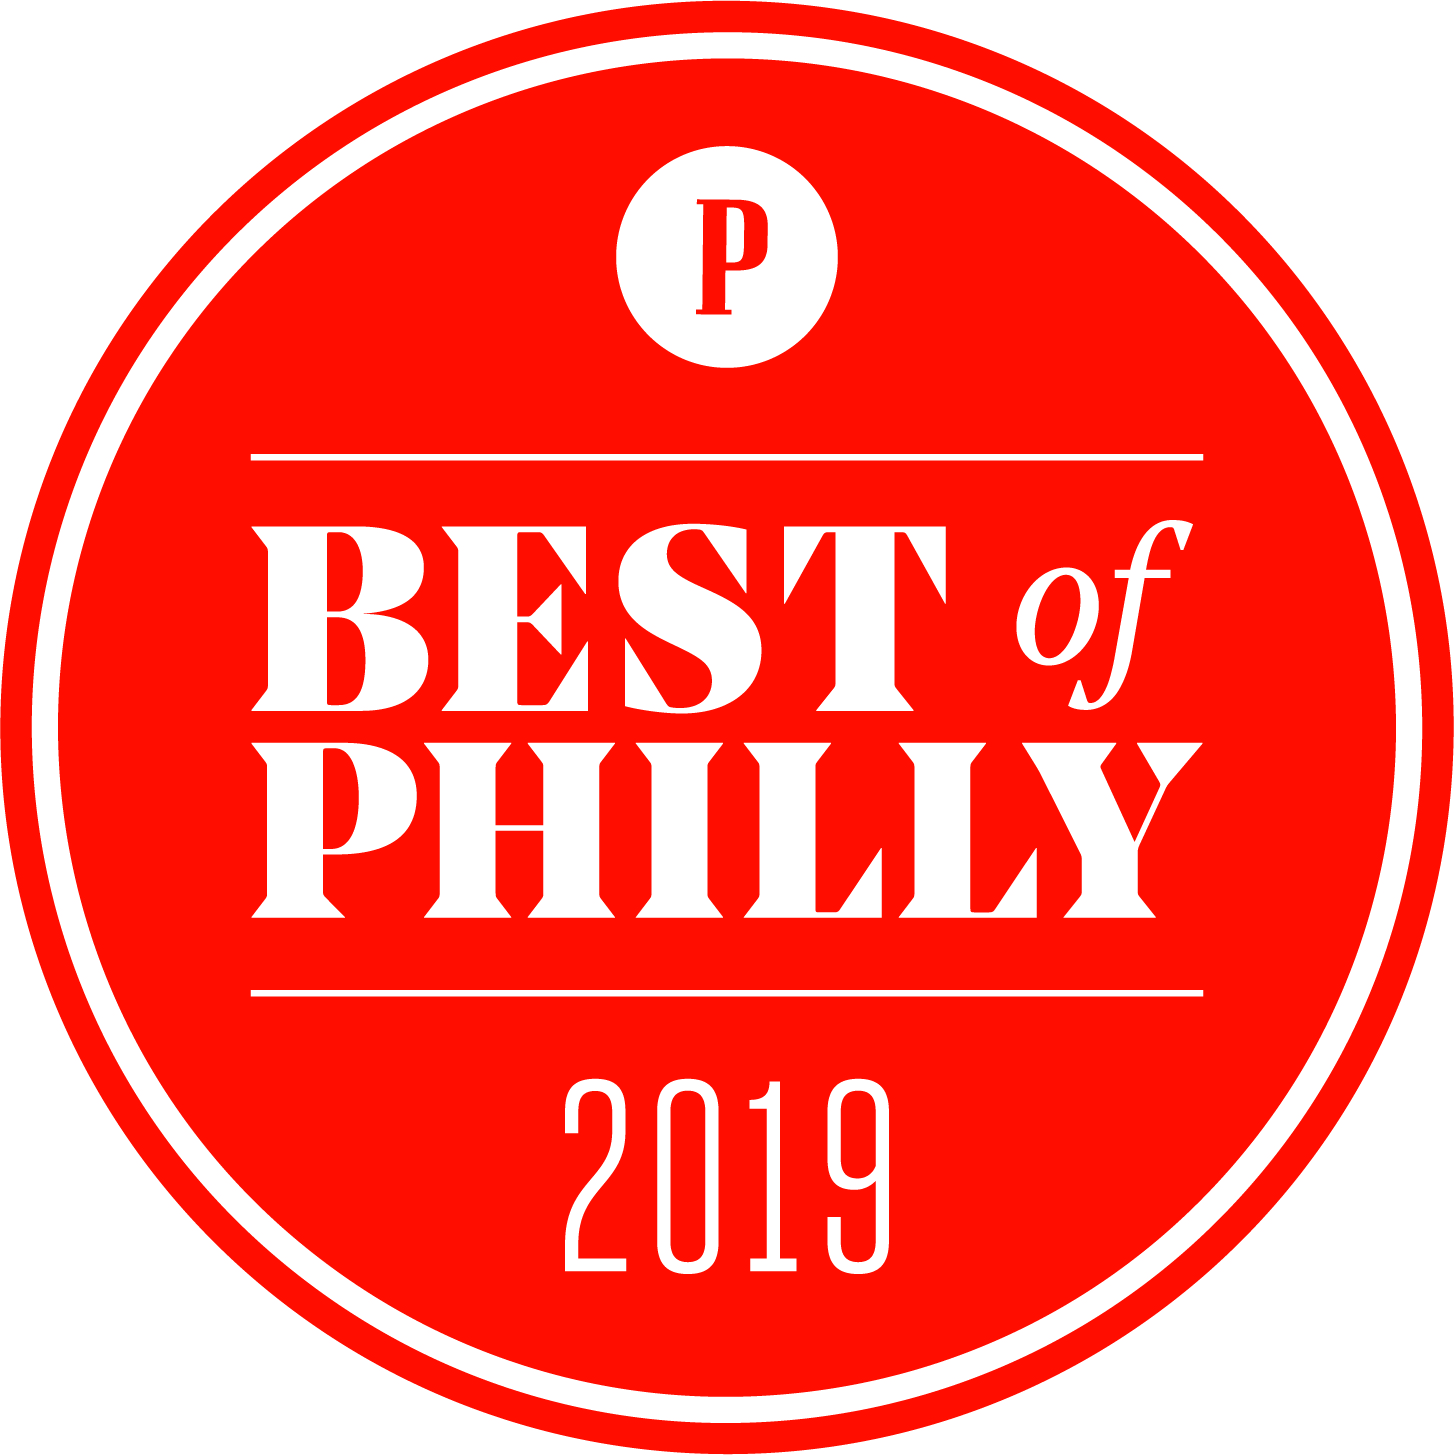 Best of Philly 2019